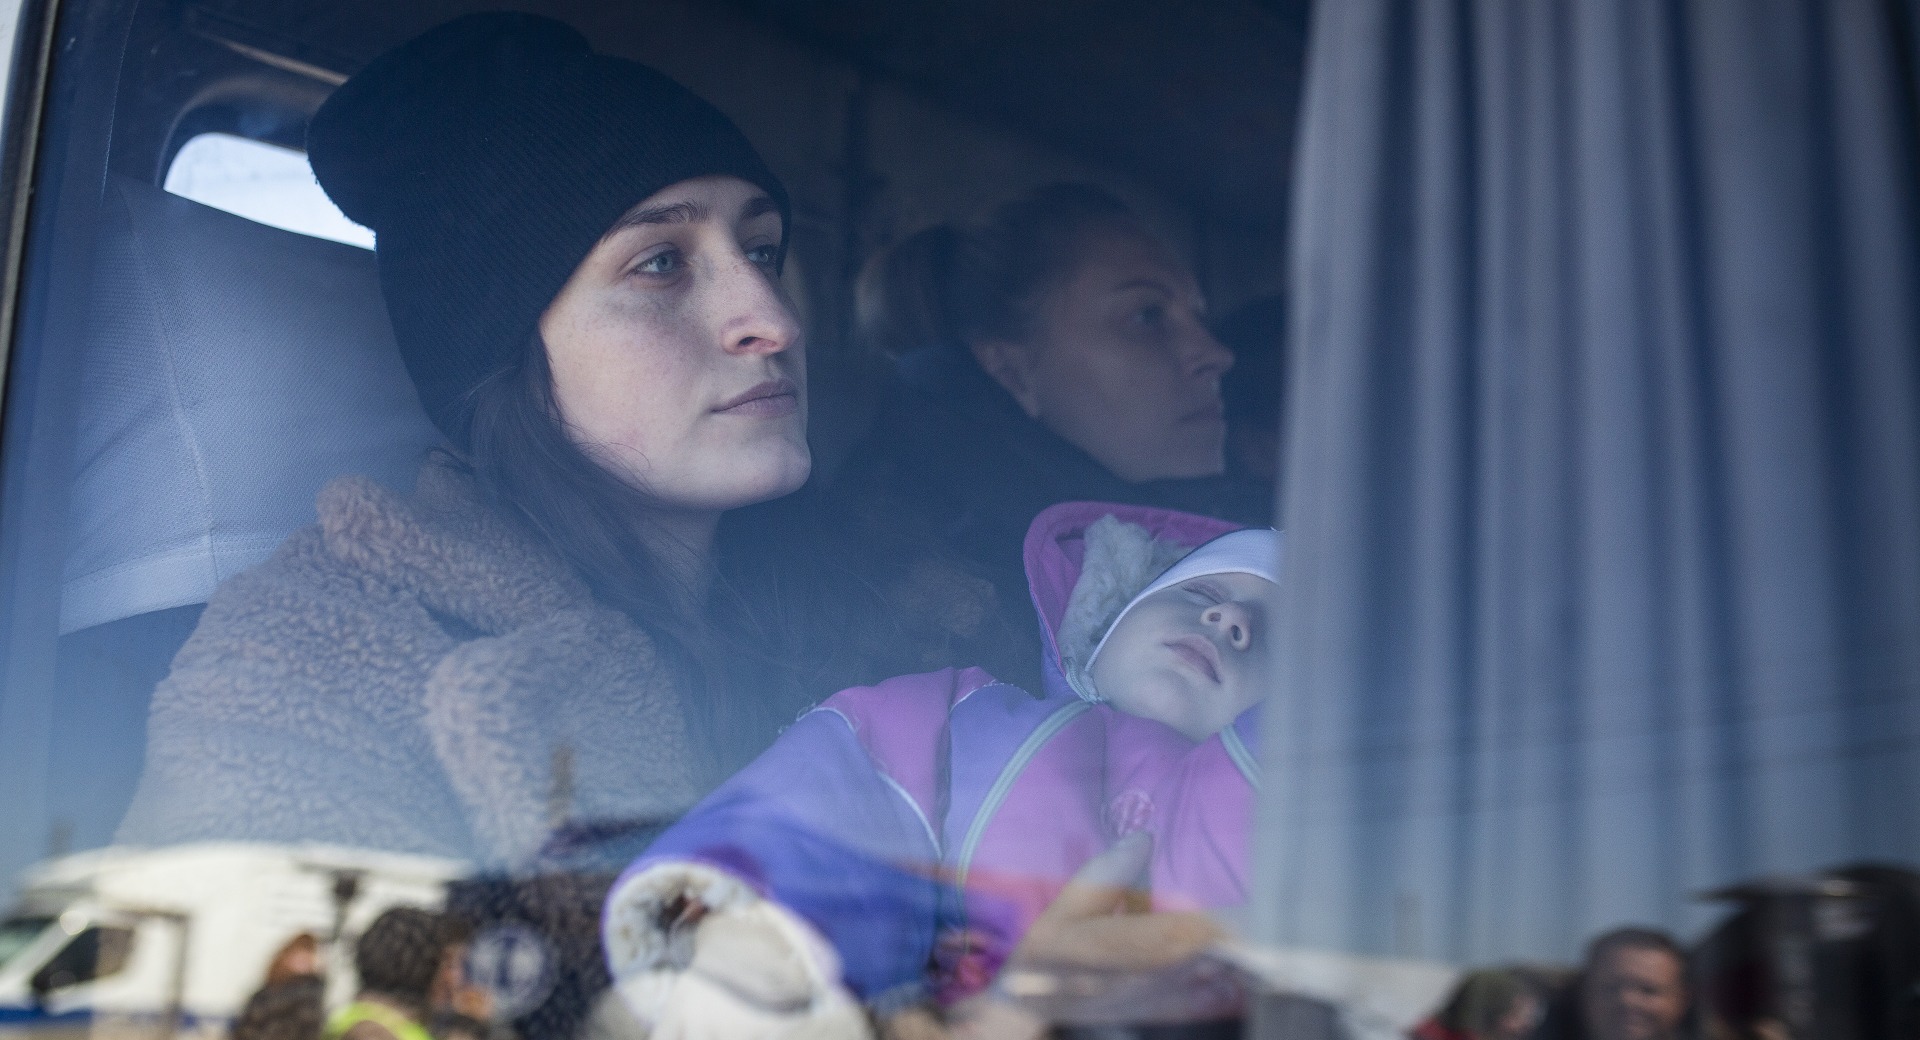 Ukrainian refugees arrive by bus in Palanca, a town on the border of Moldova and Ukraine.